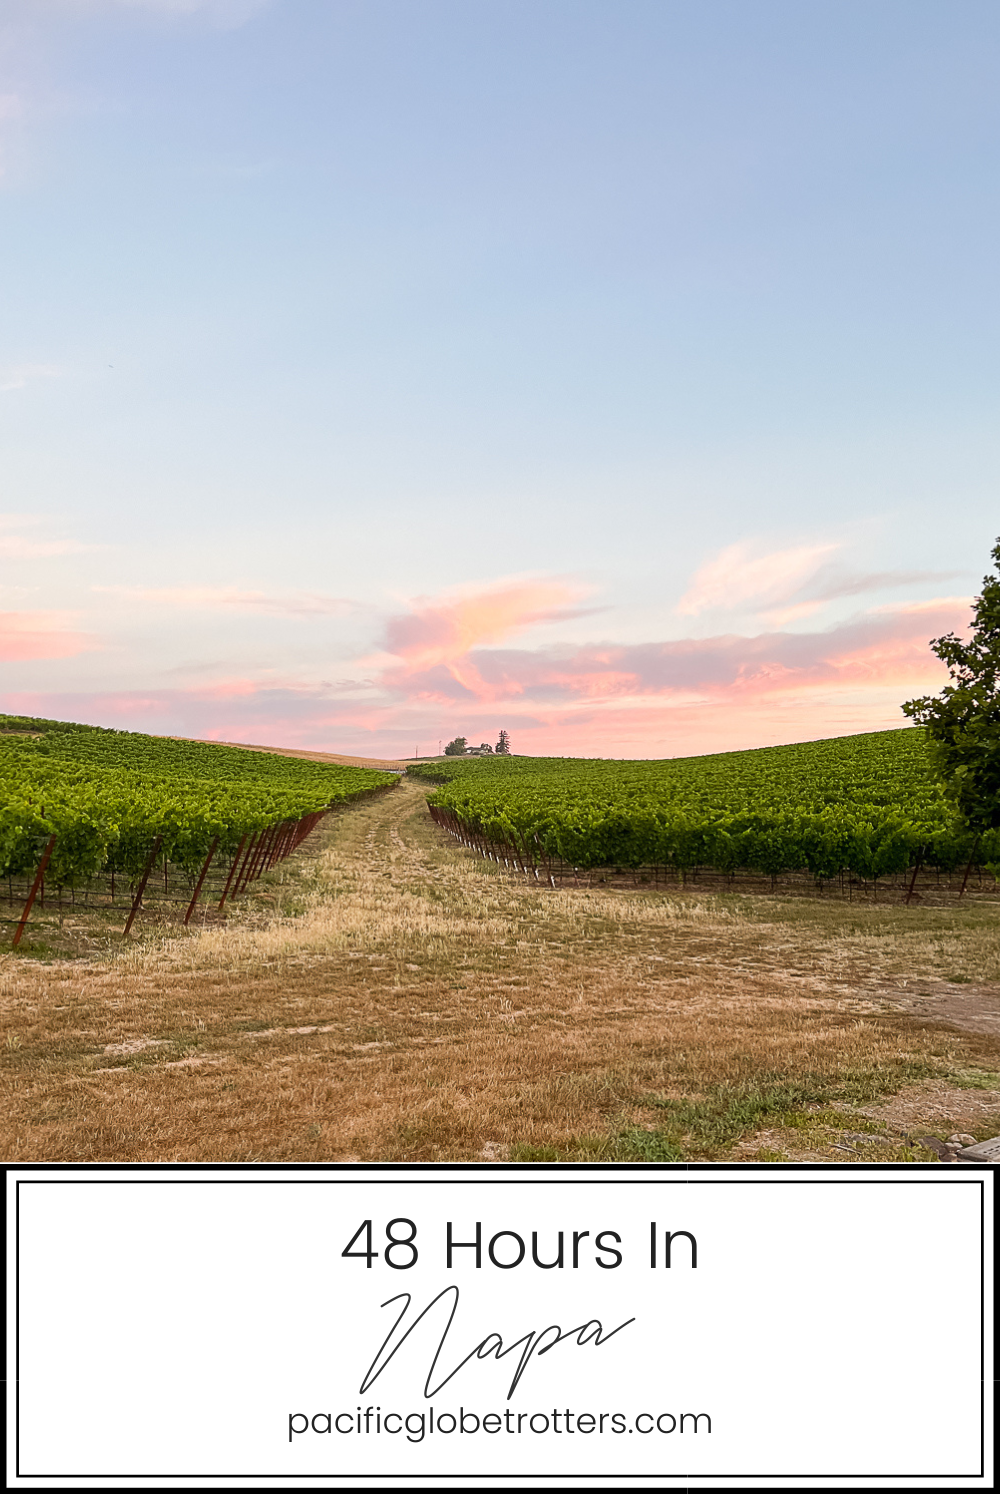 Pacific Globetrotters, budget family travel blog, shares their trip 48 hours in Napa.